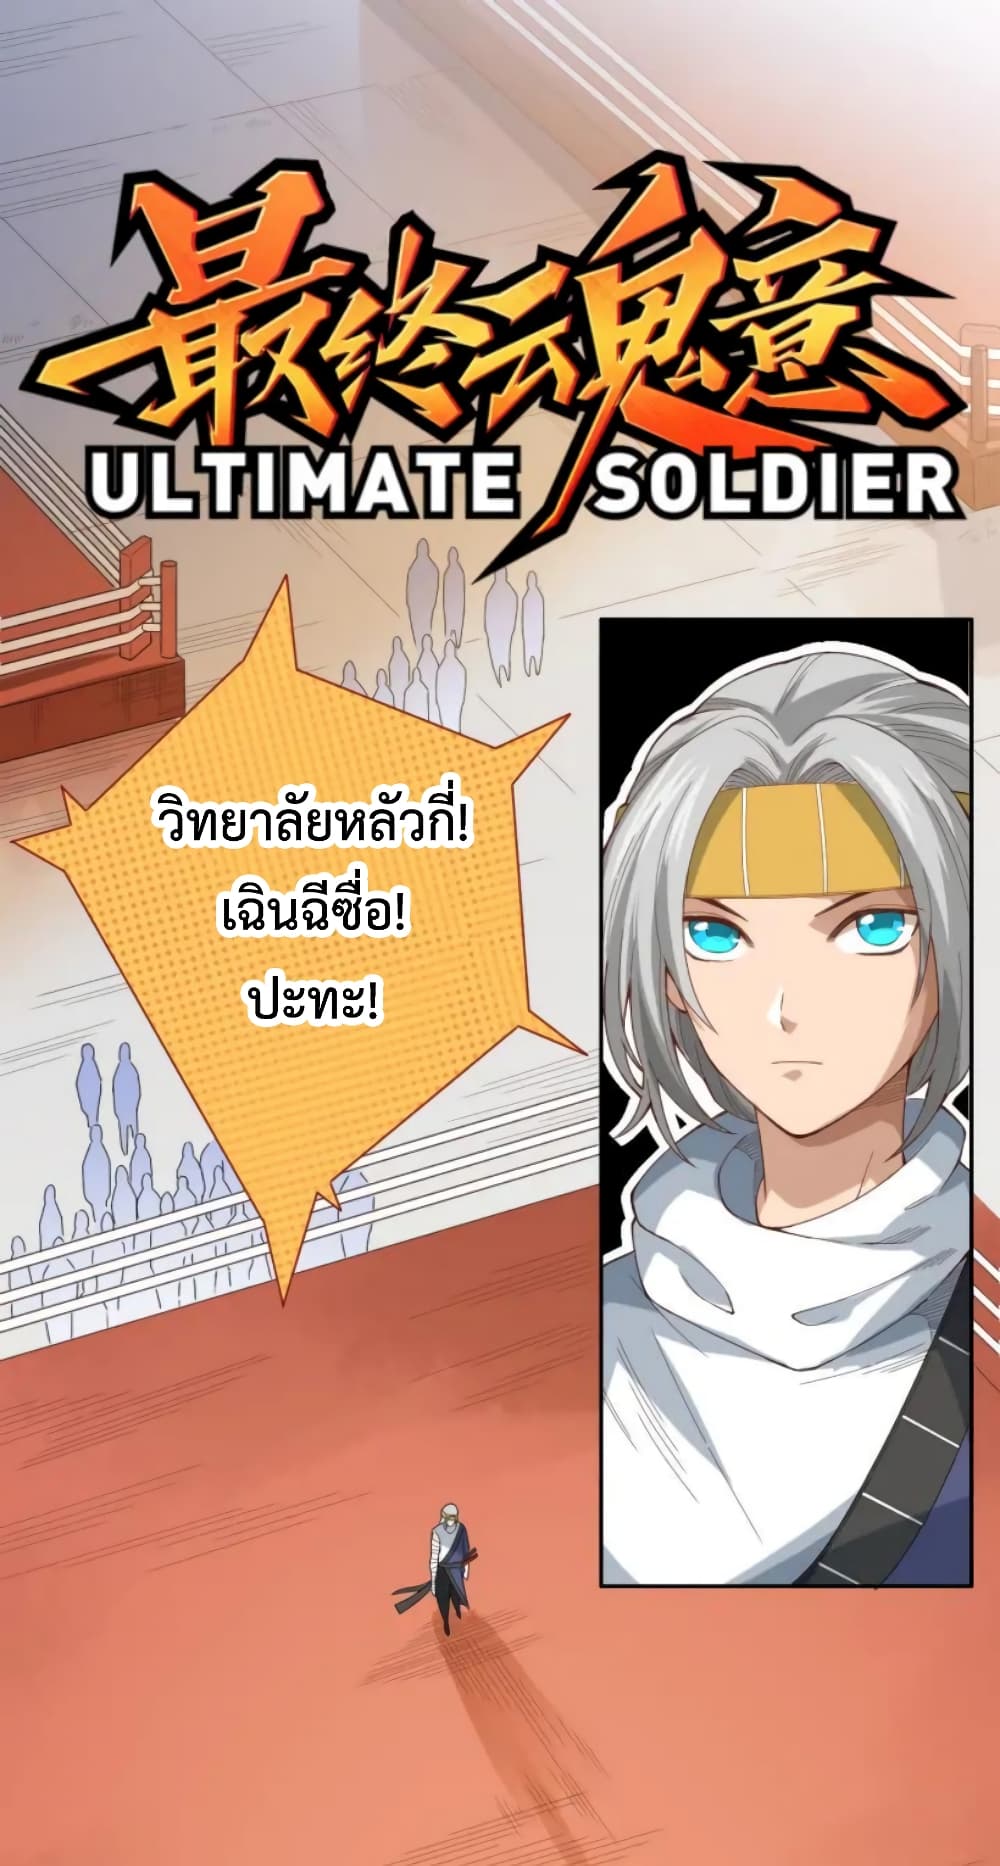 ULTIMATE SOLDIER 44-44